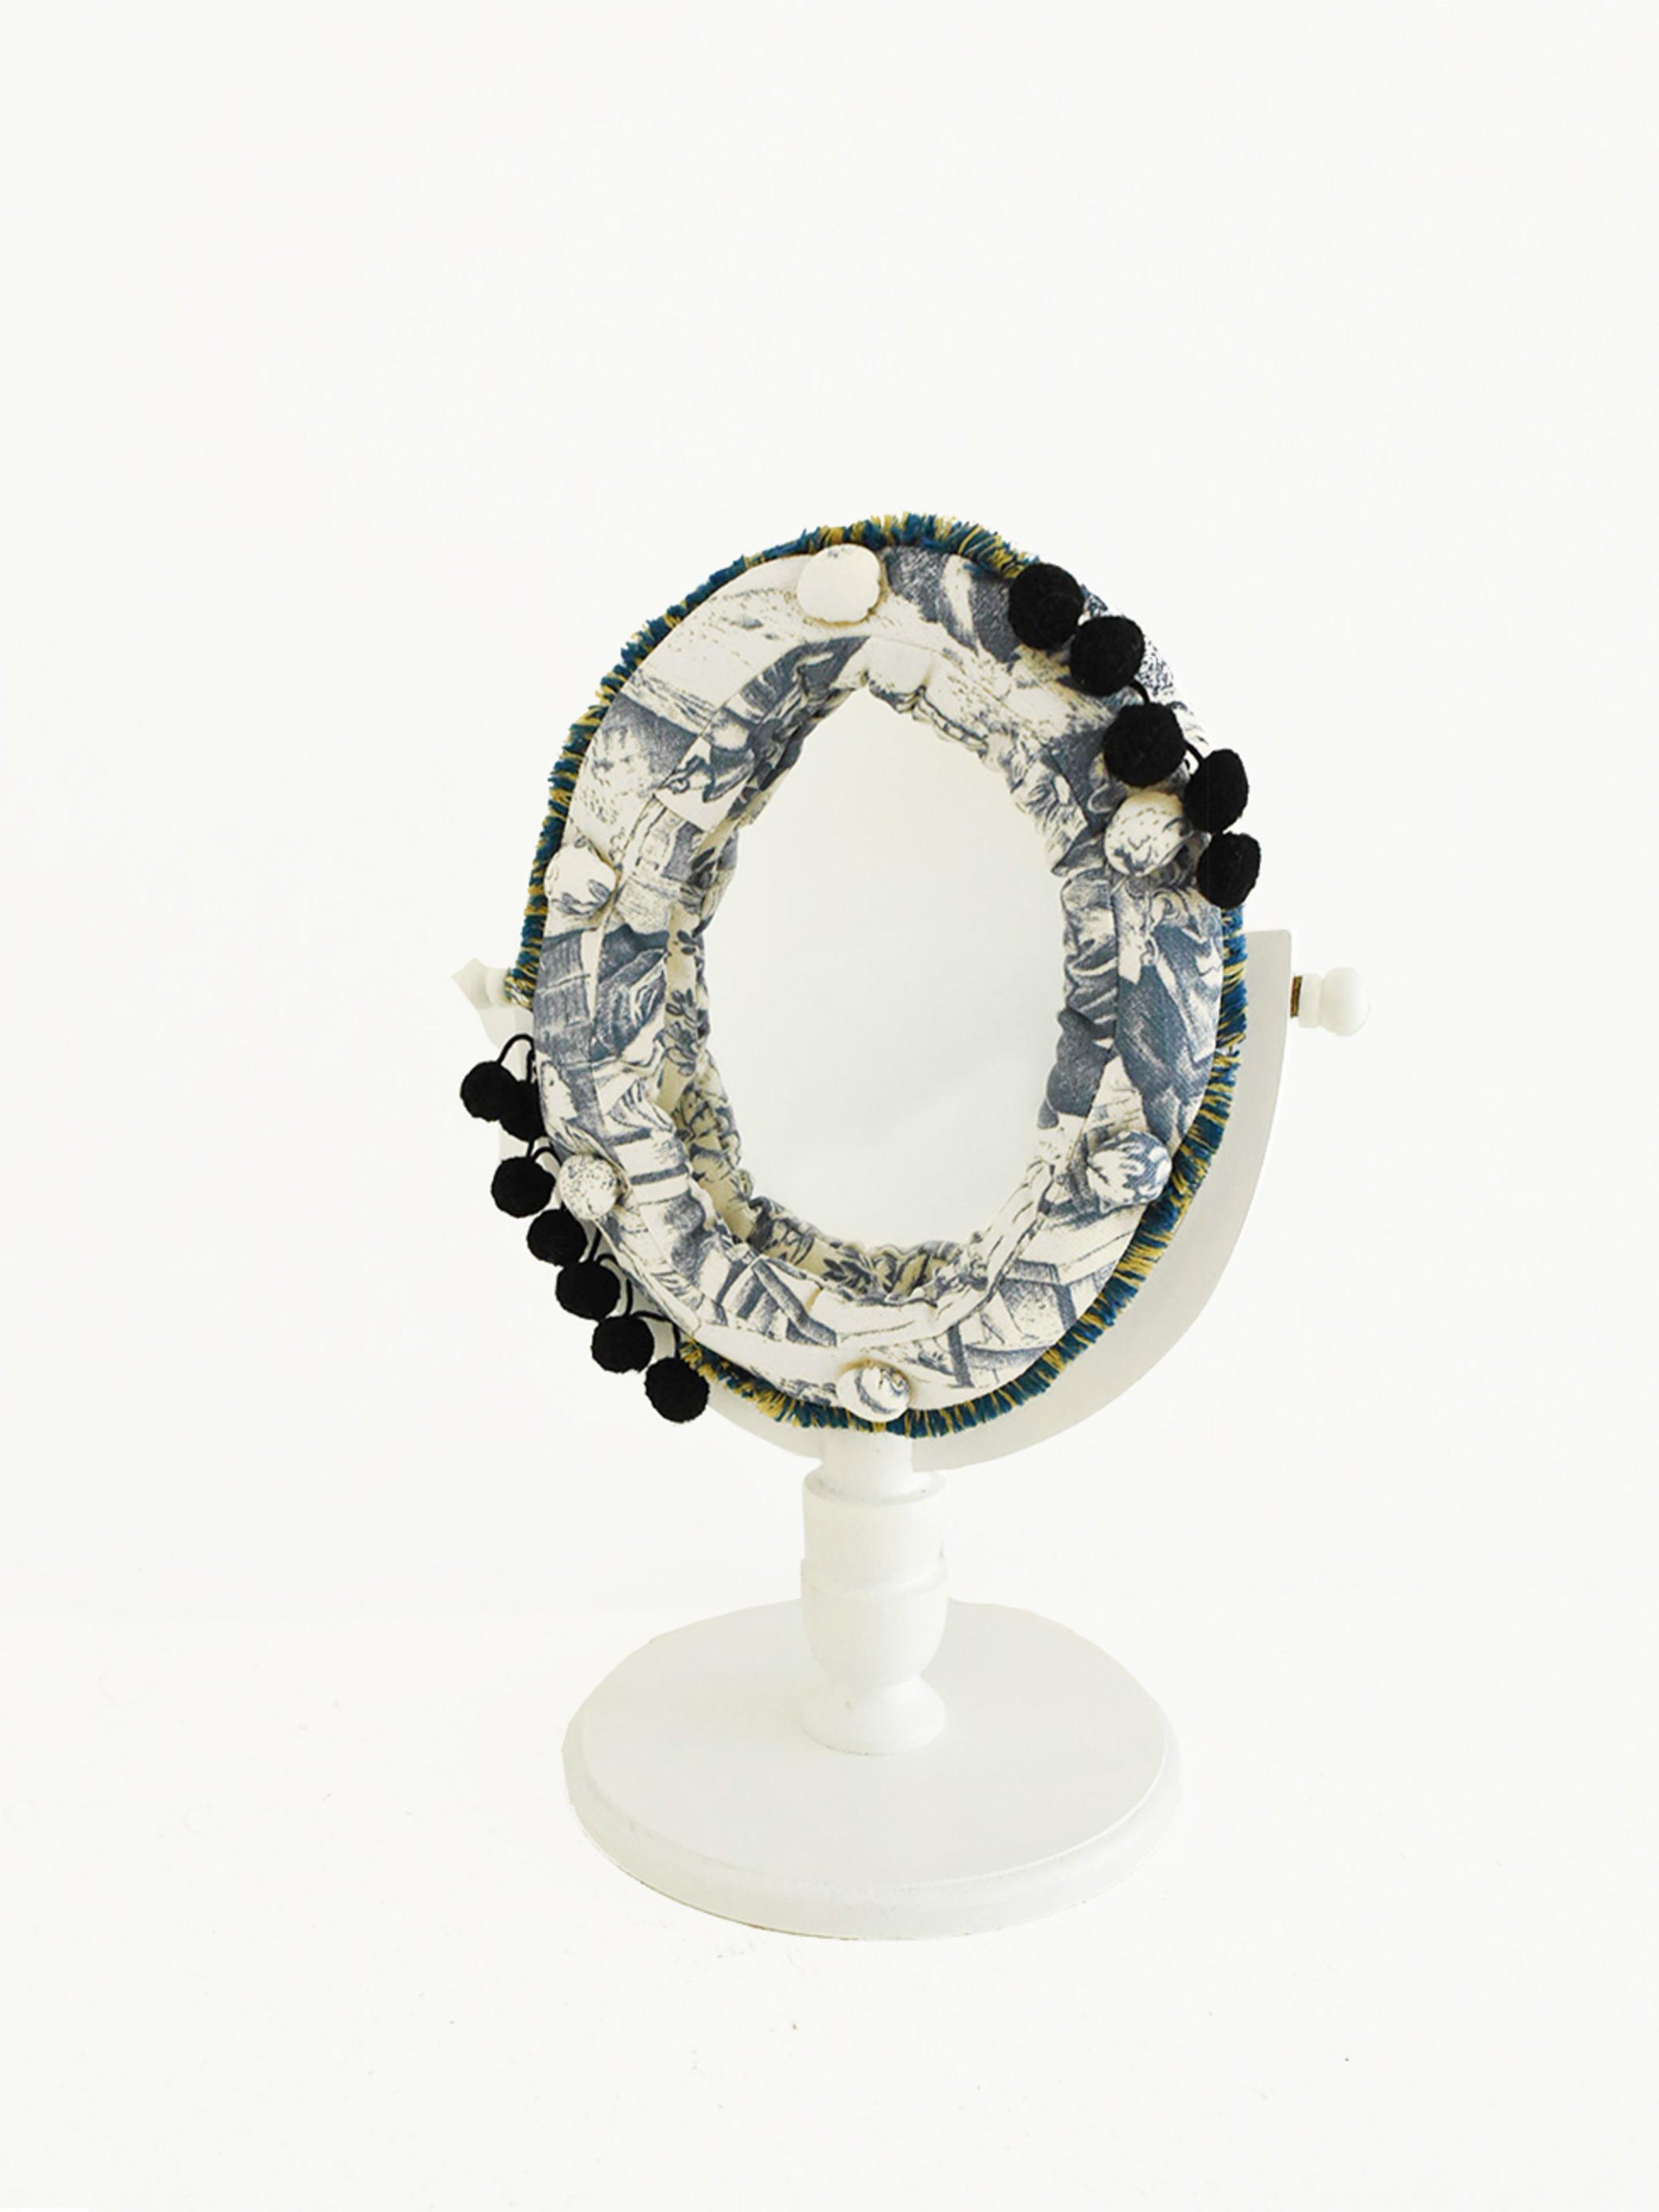 STAND MIRROR OVAL (S) toile de jouy ivory×blue